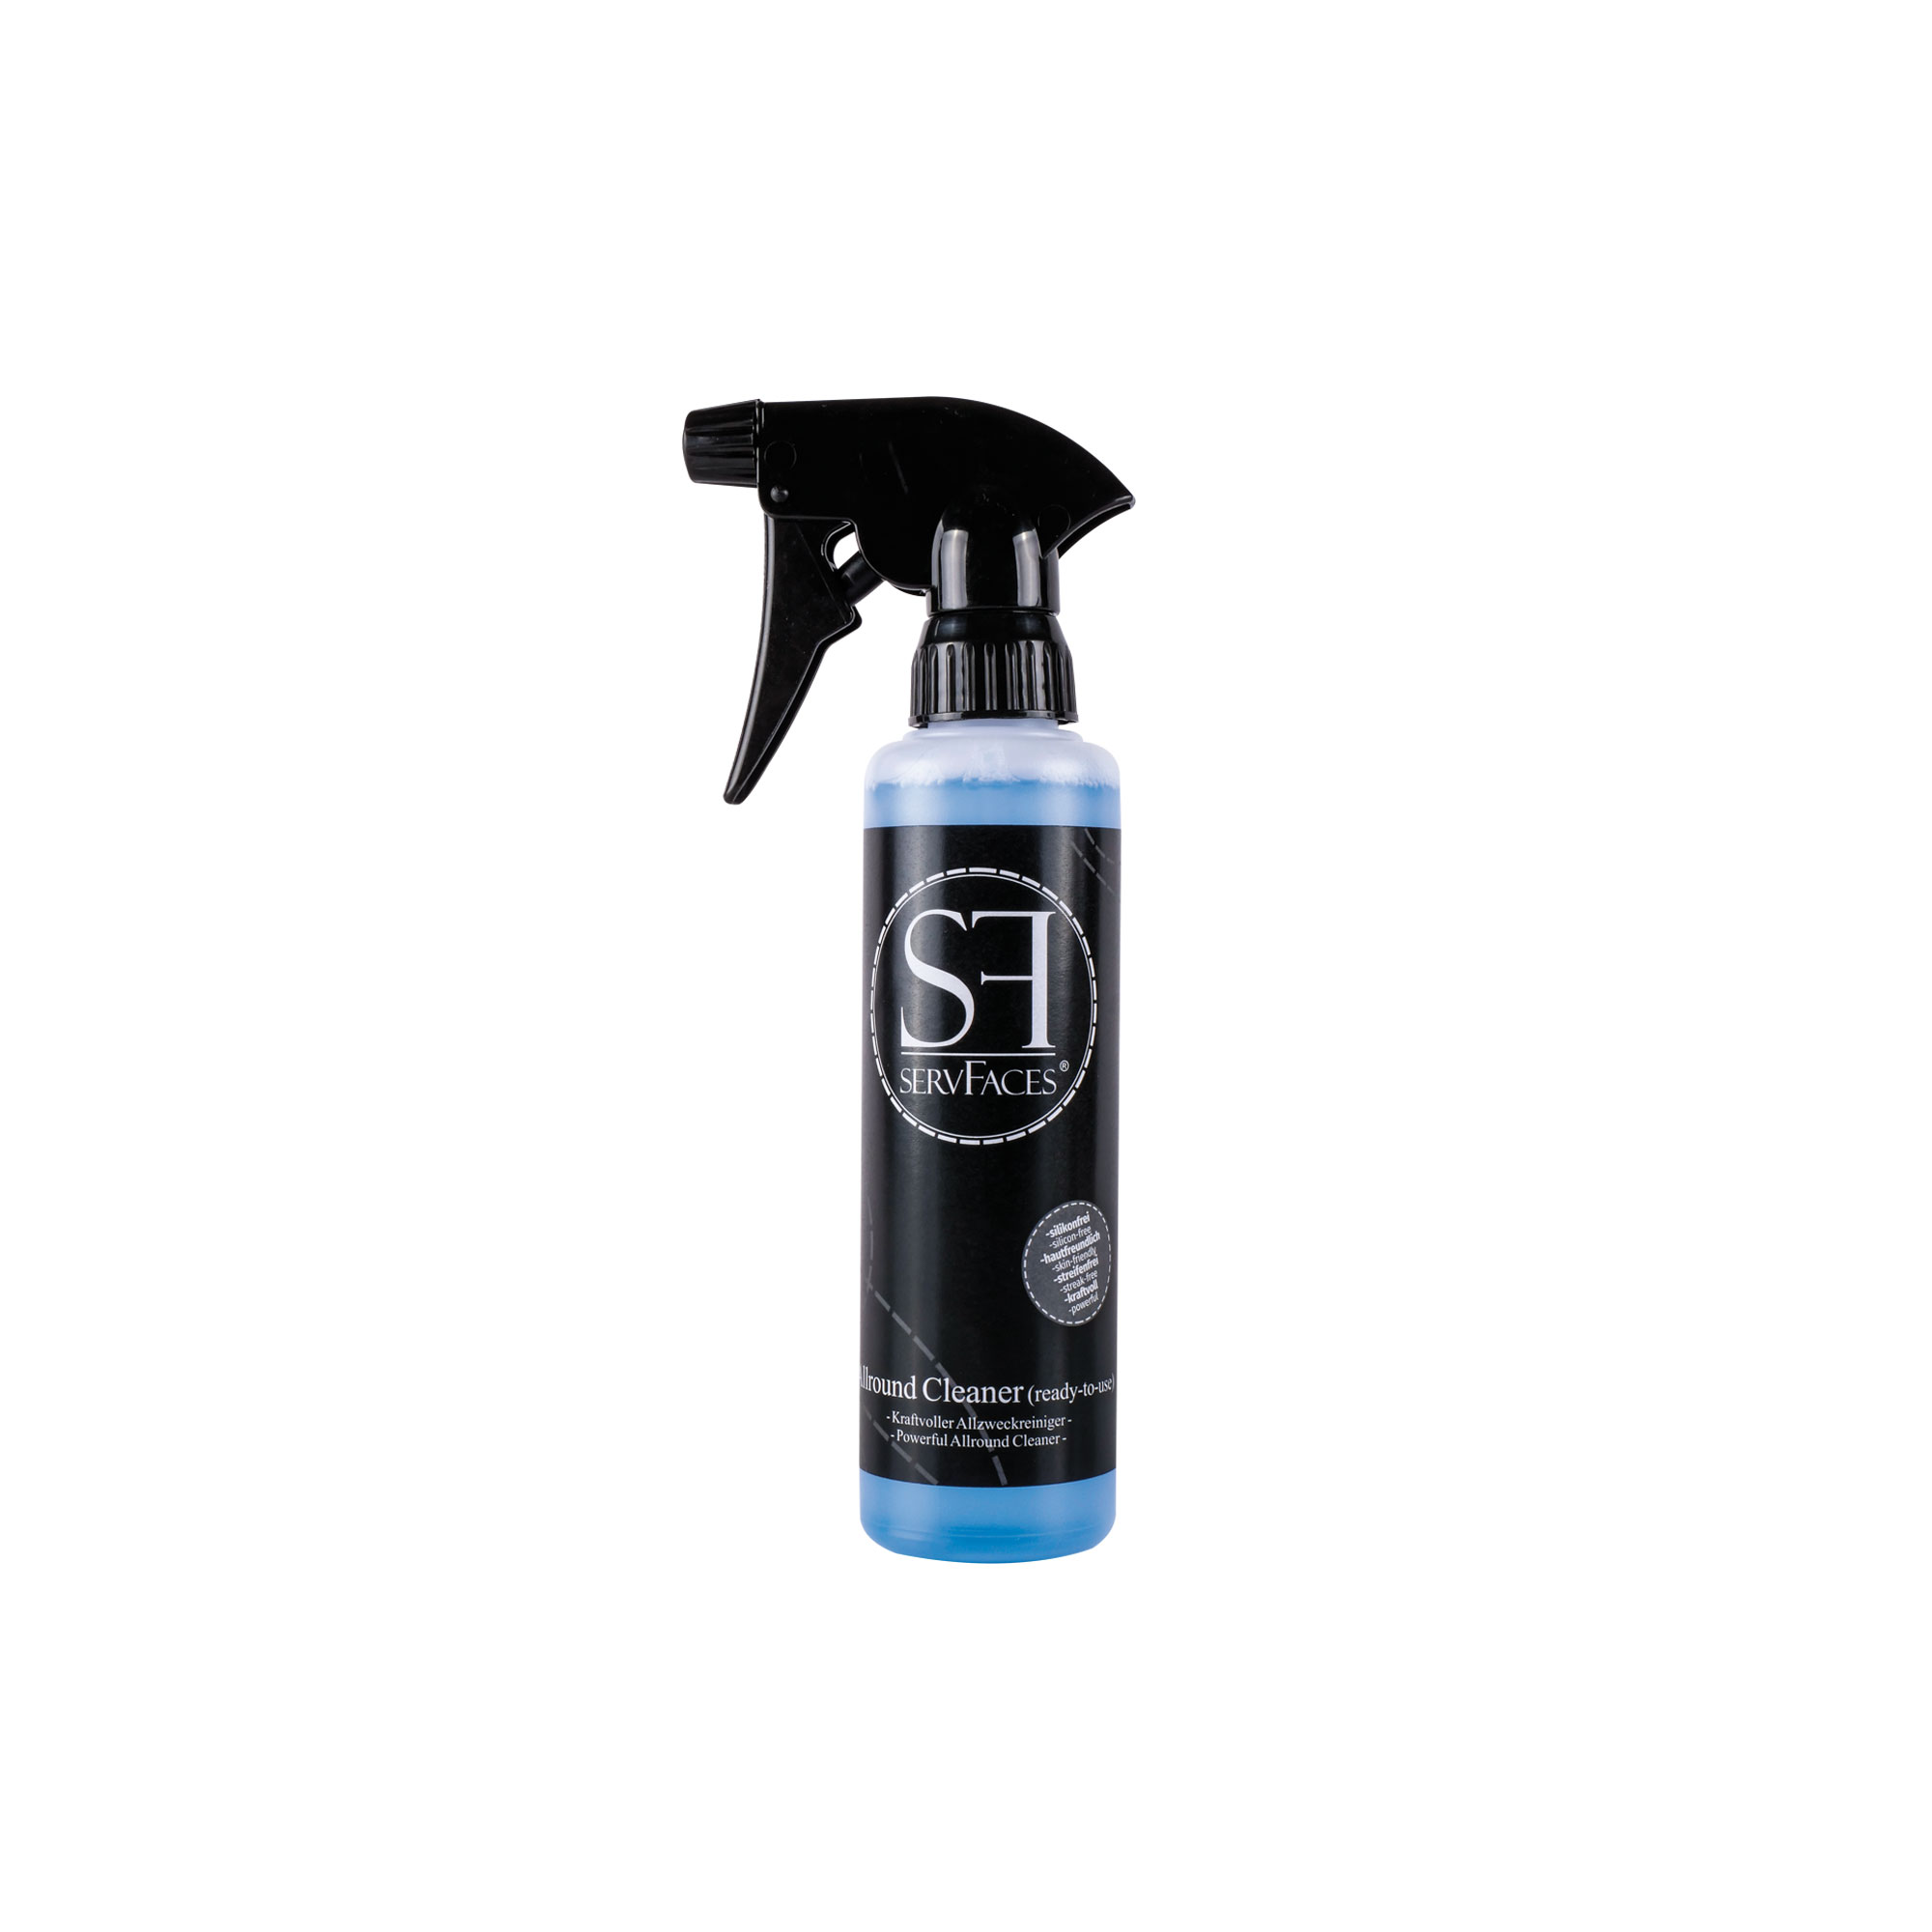 servFaces Allround Cleaner (ready-to-use)